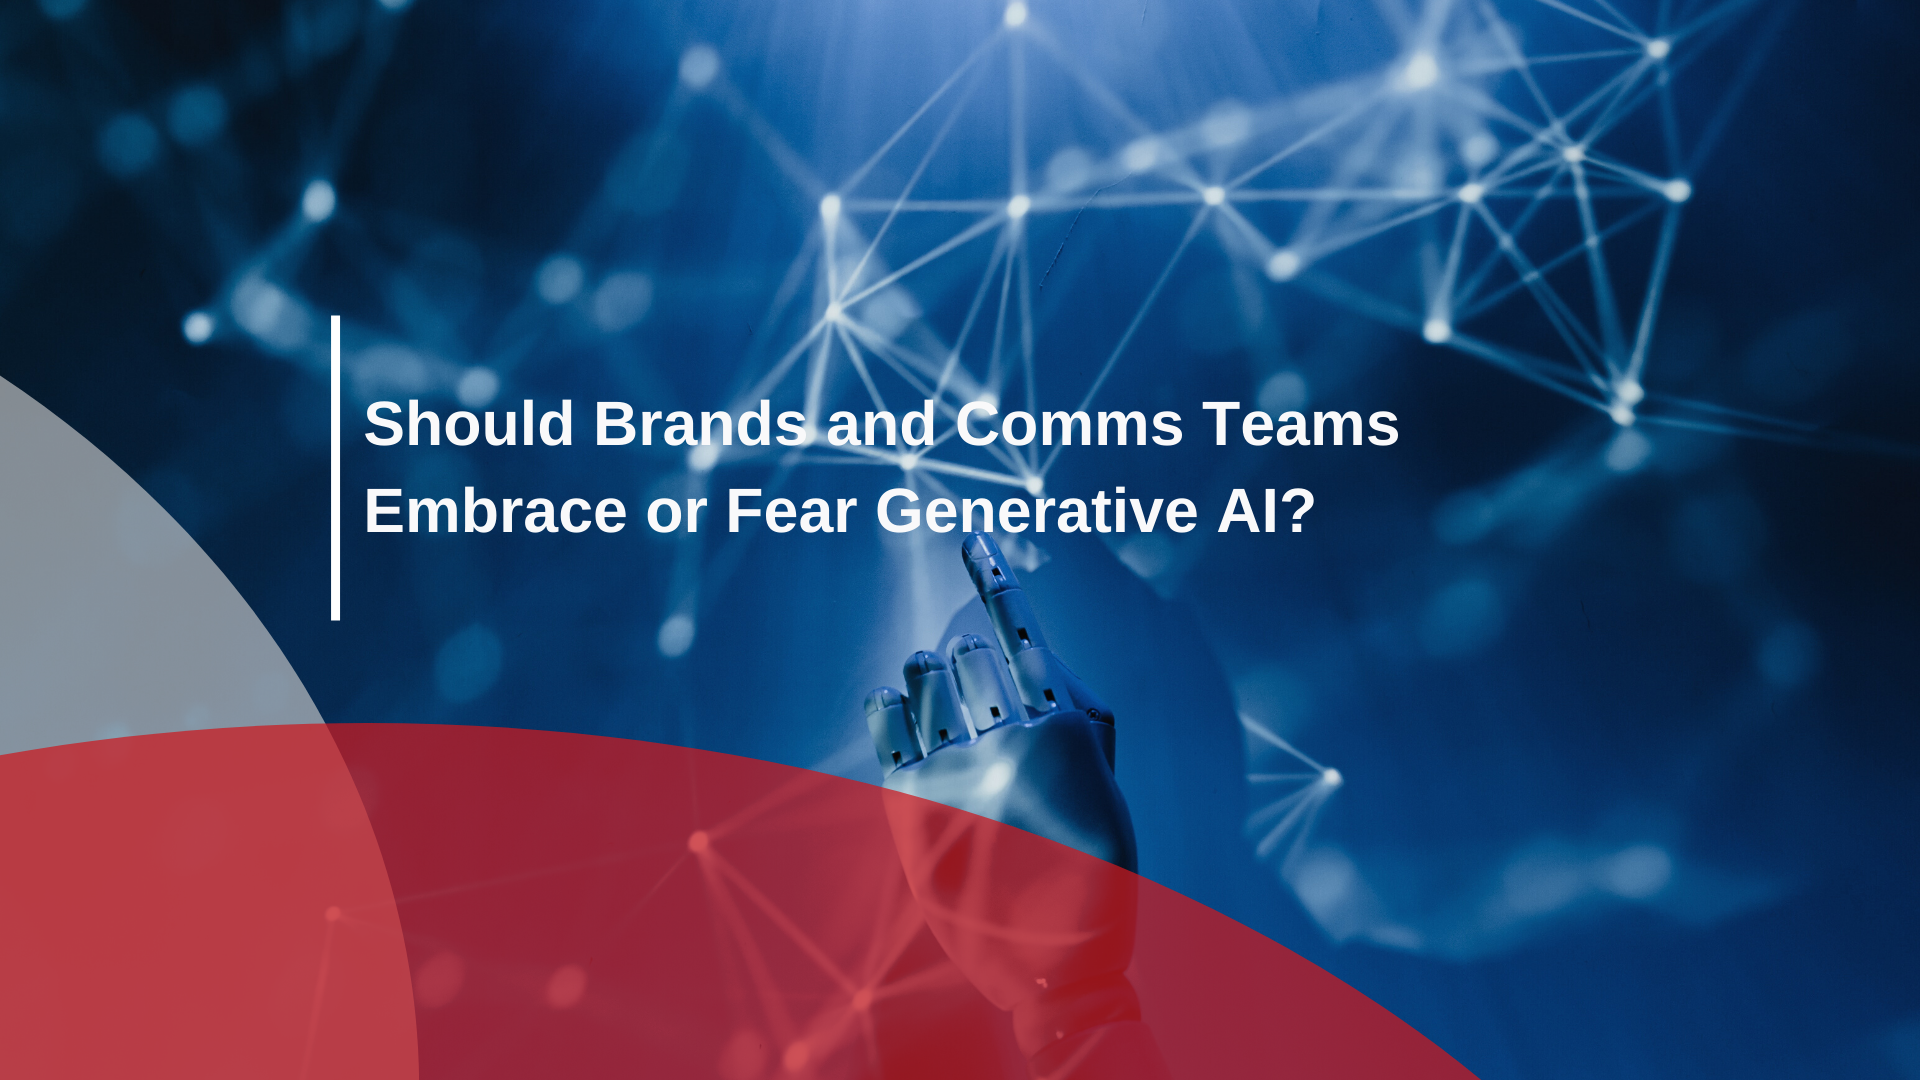 Should Brands and Comms Teams Embrace or Fear Generative AI?